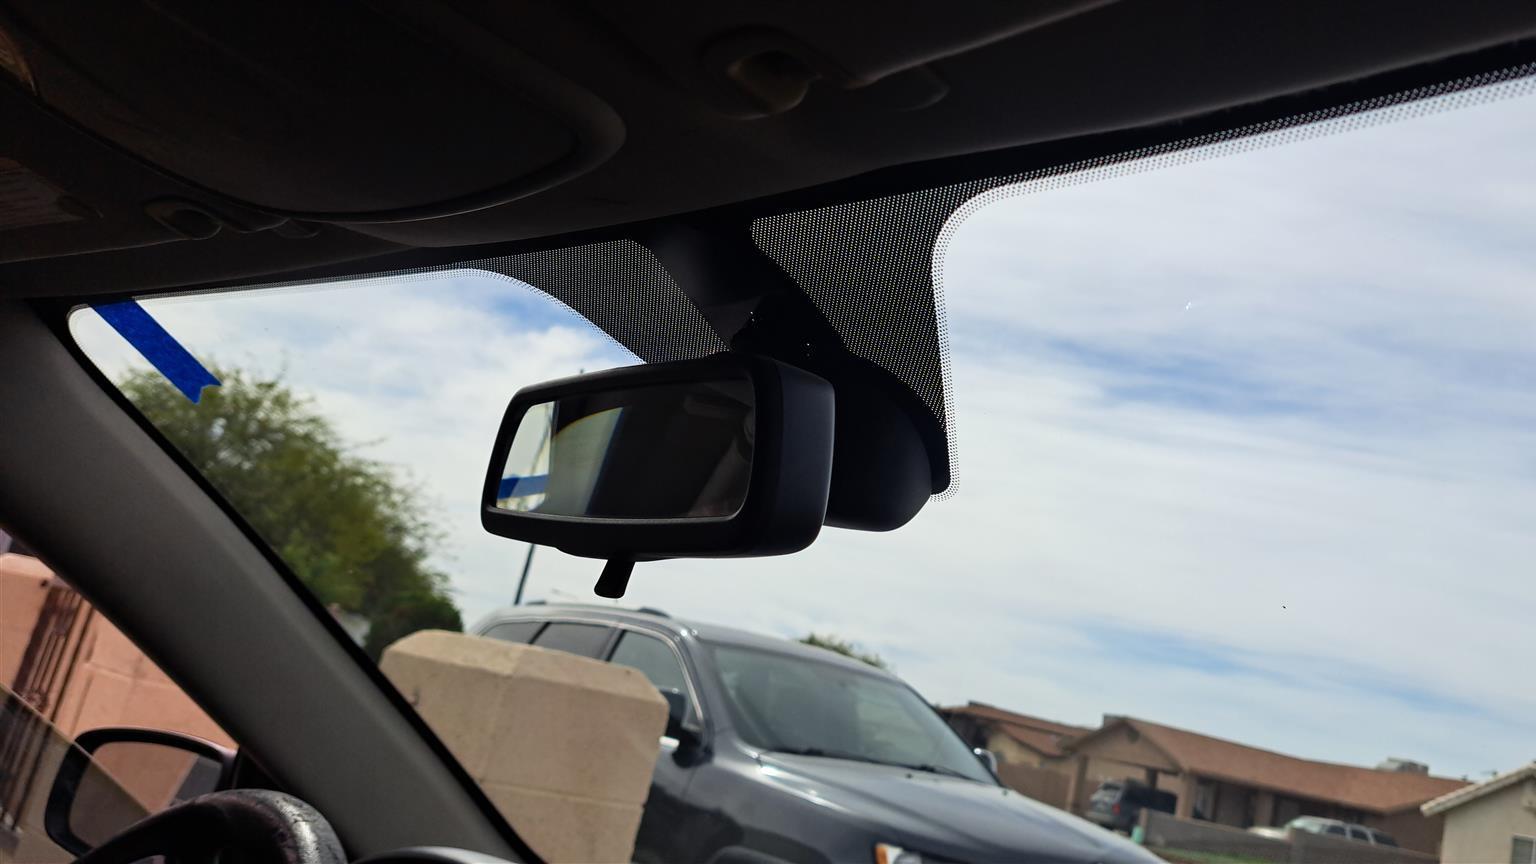 Restore clarity and functionality to your vehicle with C&E Auto Glass's auto mirror repair service. Whether it's a cracked mirror or a malfunctioning mechanism, I meticulously address all mirror-related issues, ensuring optimal visibility and safety on the road. Trust me to deliver prompt and reliable repairs that get you back behind the wheel with confidence.